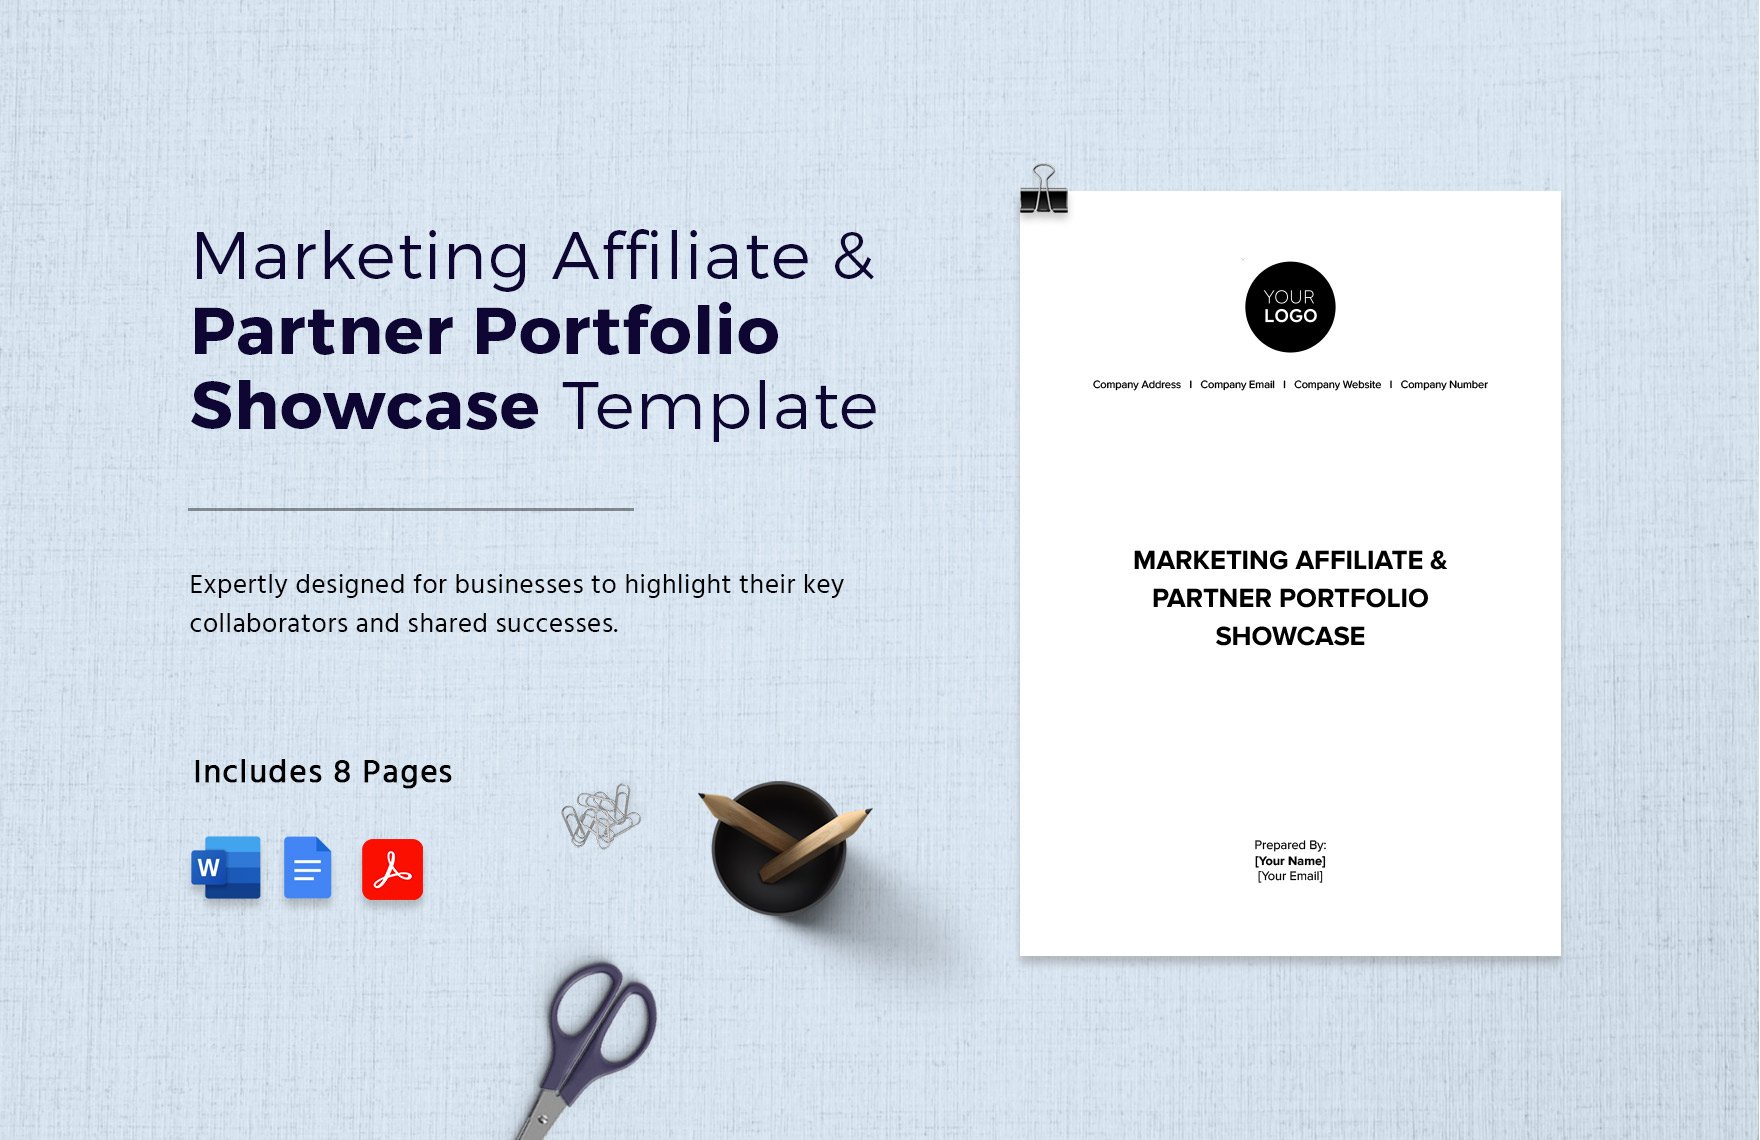 Marketing Affiliate Policy & Procedure Guide Template in Word, Google Docs, PDF